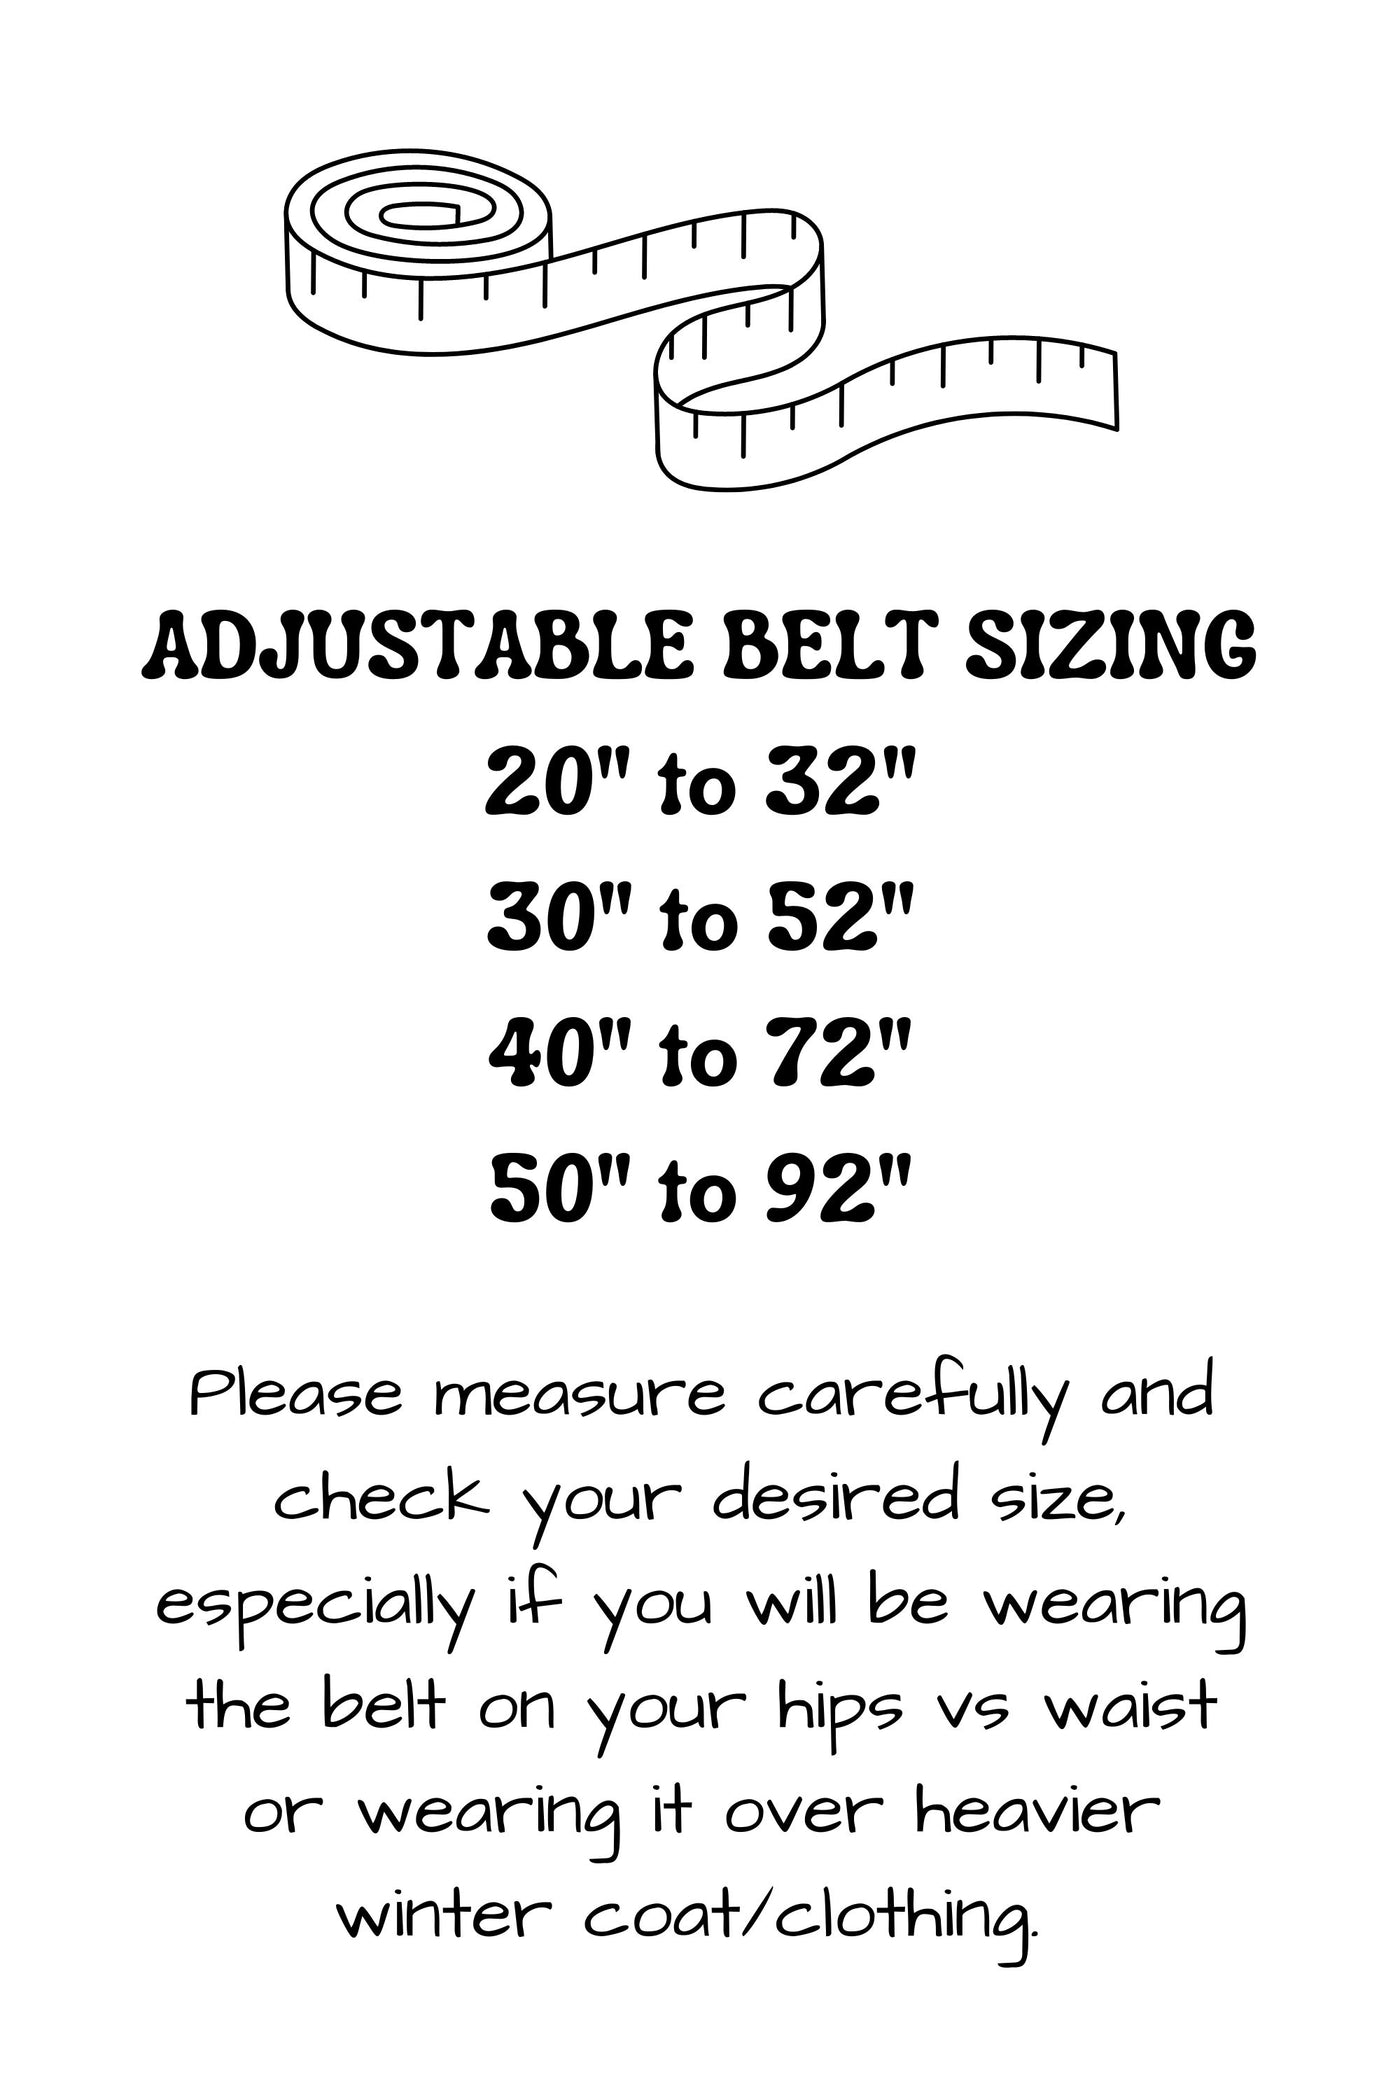 Adjustable hands free leash belts are available in four adjustable sizes, including 20 inches to 32 inches, 30 inches to 52 inches, 40 inches to 72 inches, and 50 inches to 92 inches.